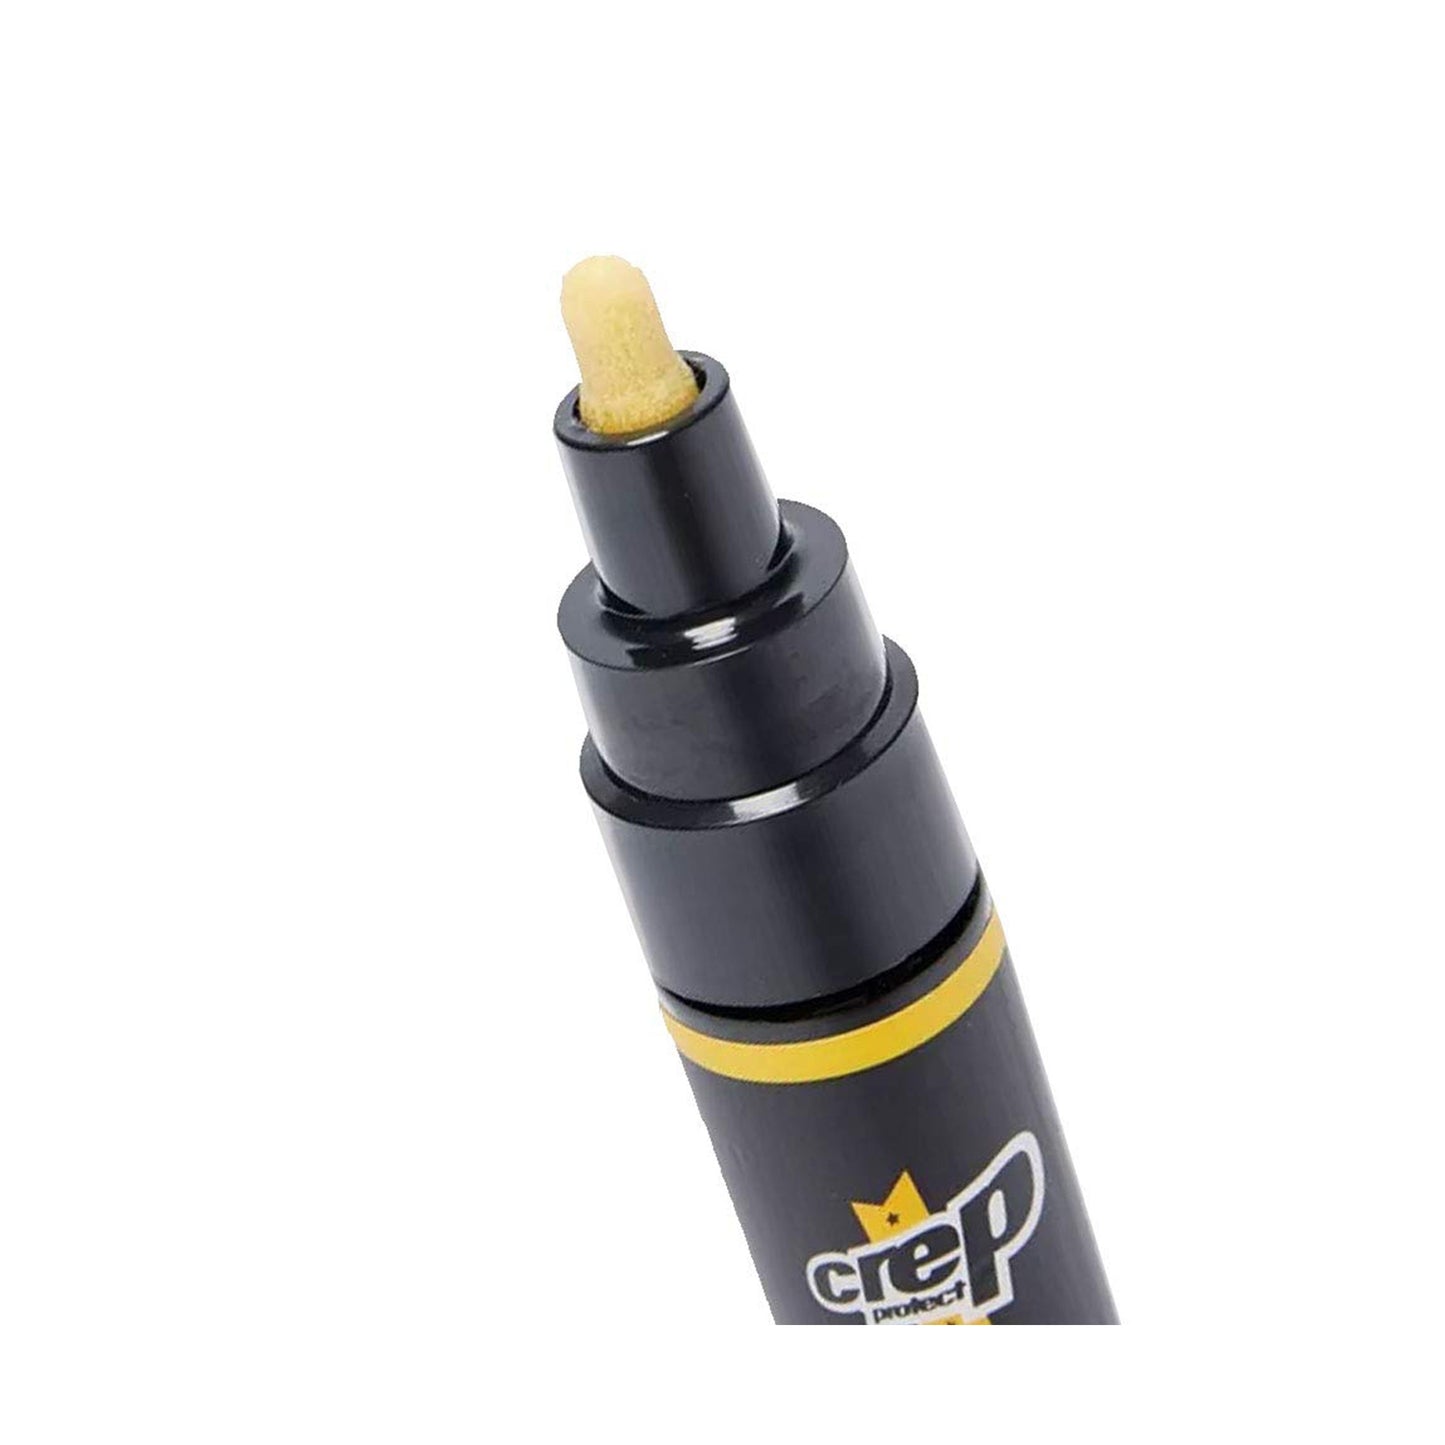 Crep Protect - Marker On